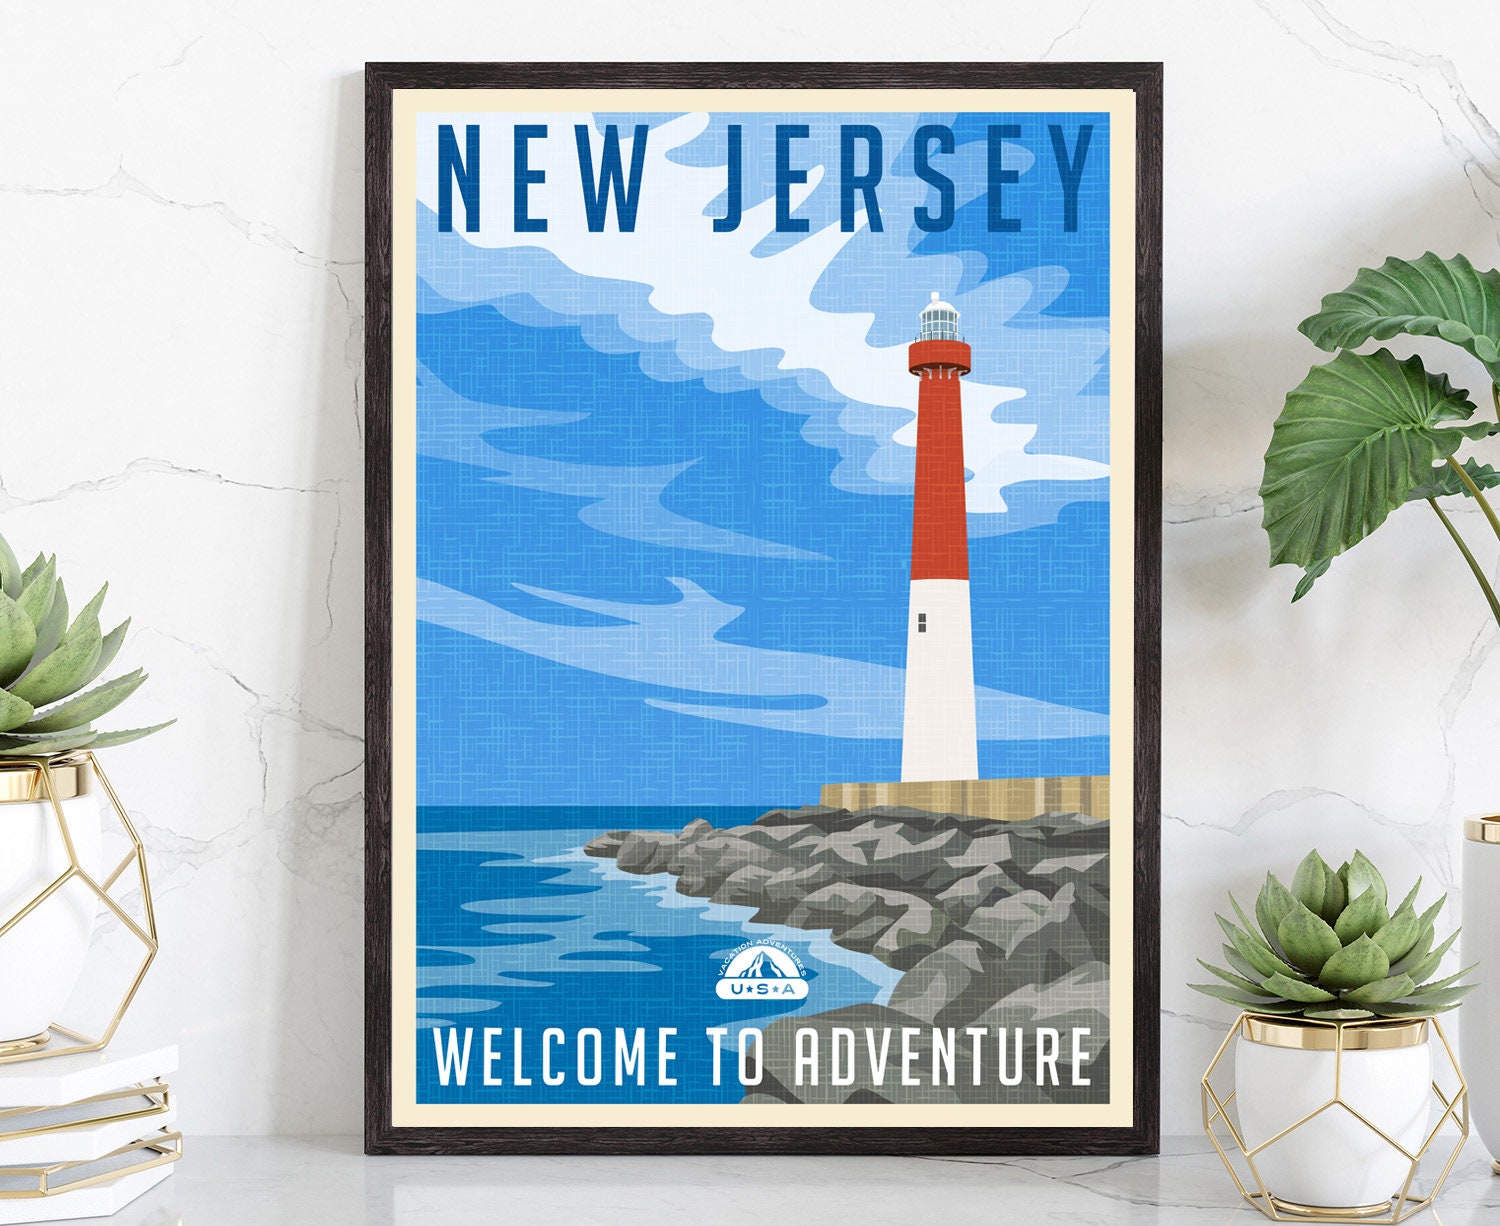 Retro Style Travel Poster, New Jersey Vintage Rustic Poster Print, Home Wall Art, Office Wall Decor, Posters, New Jersey, State Map Poster